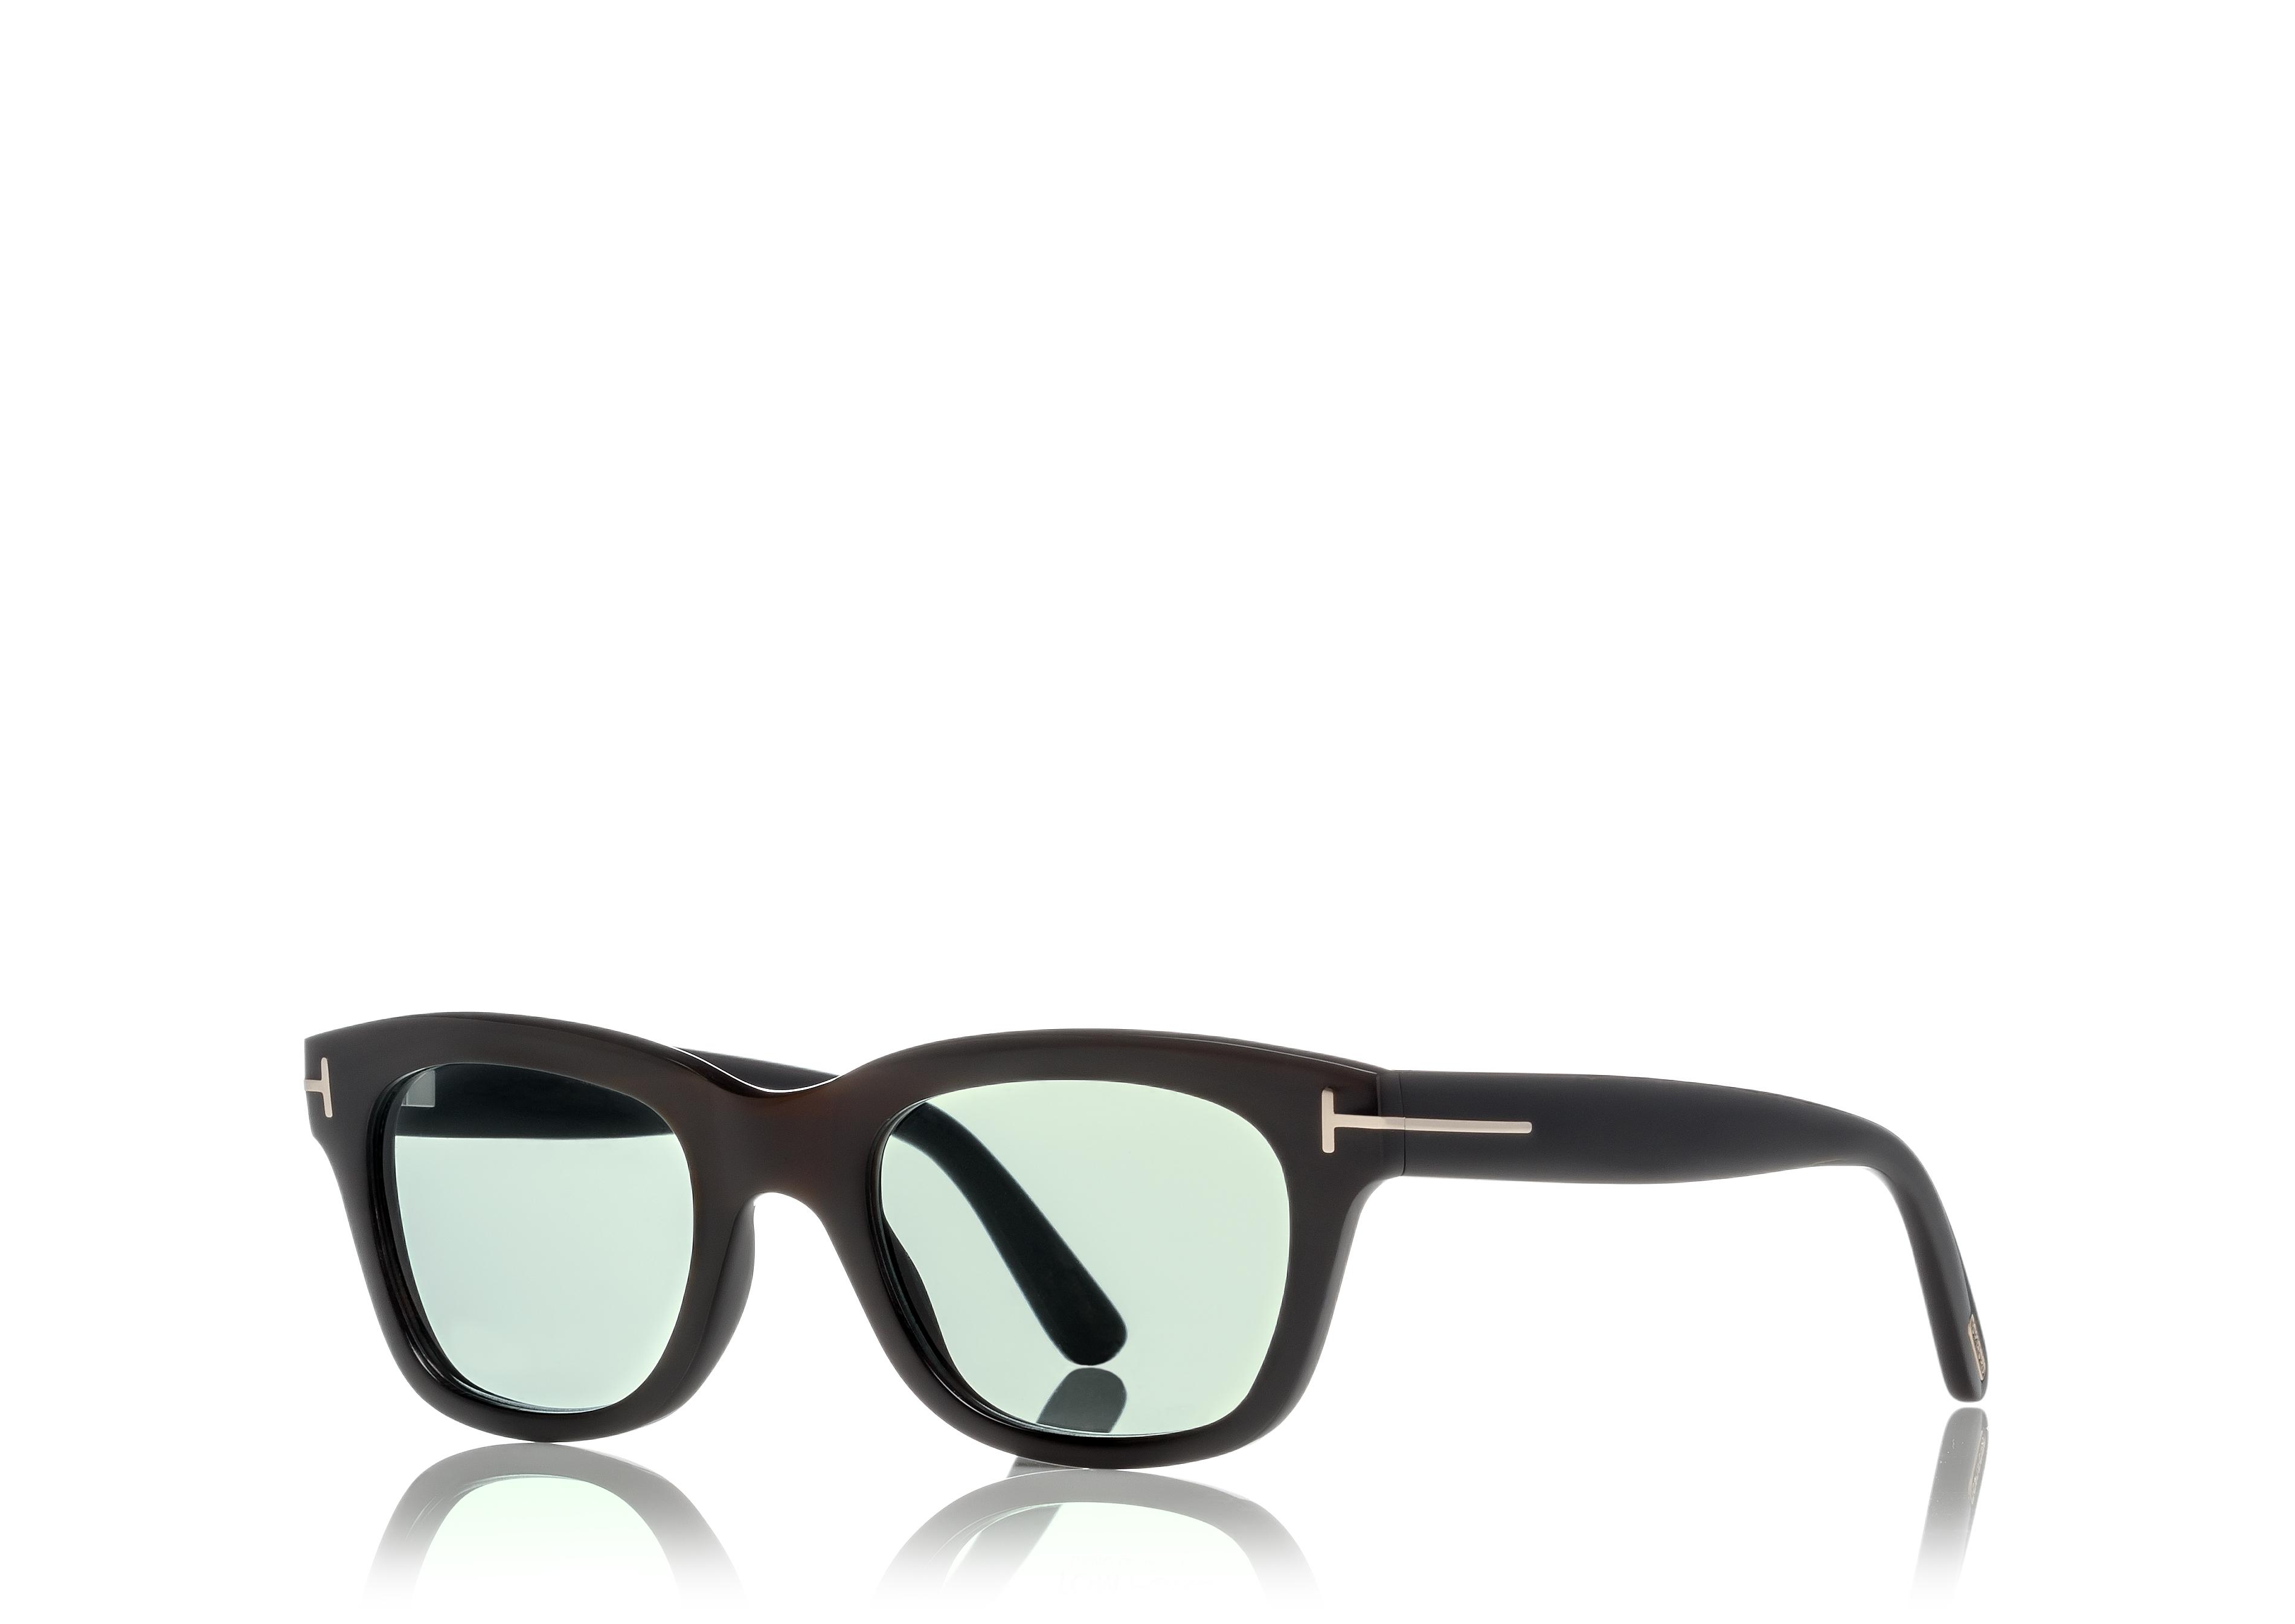 lenshop on X: Tom Ford channels a refined 1950s verve with these